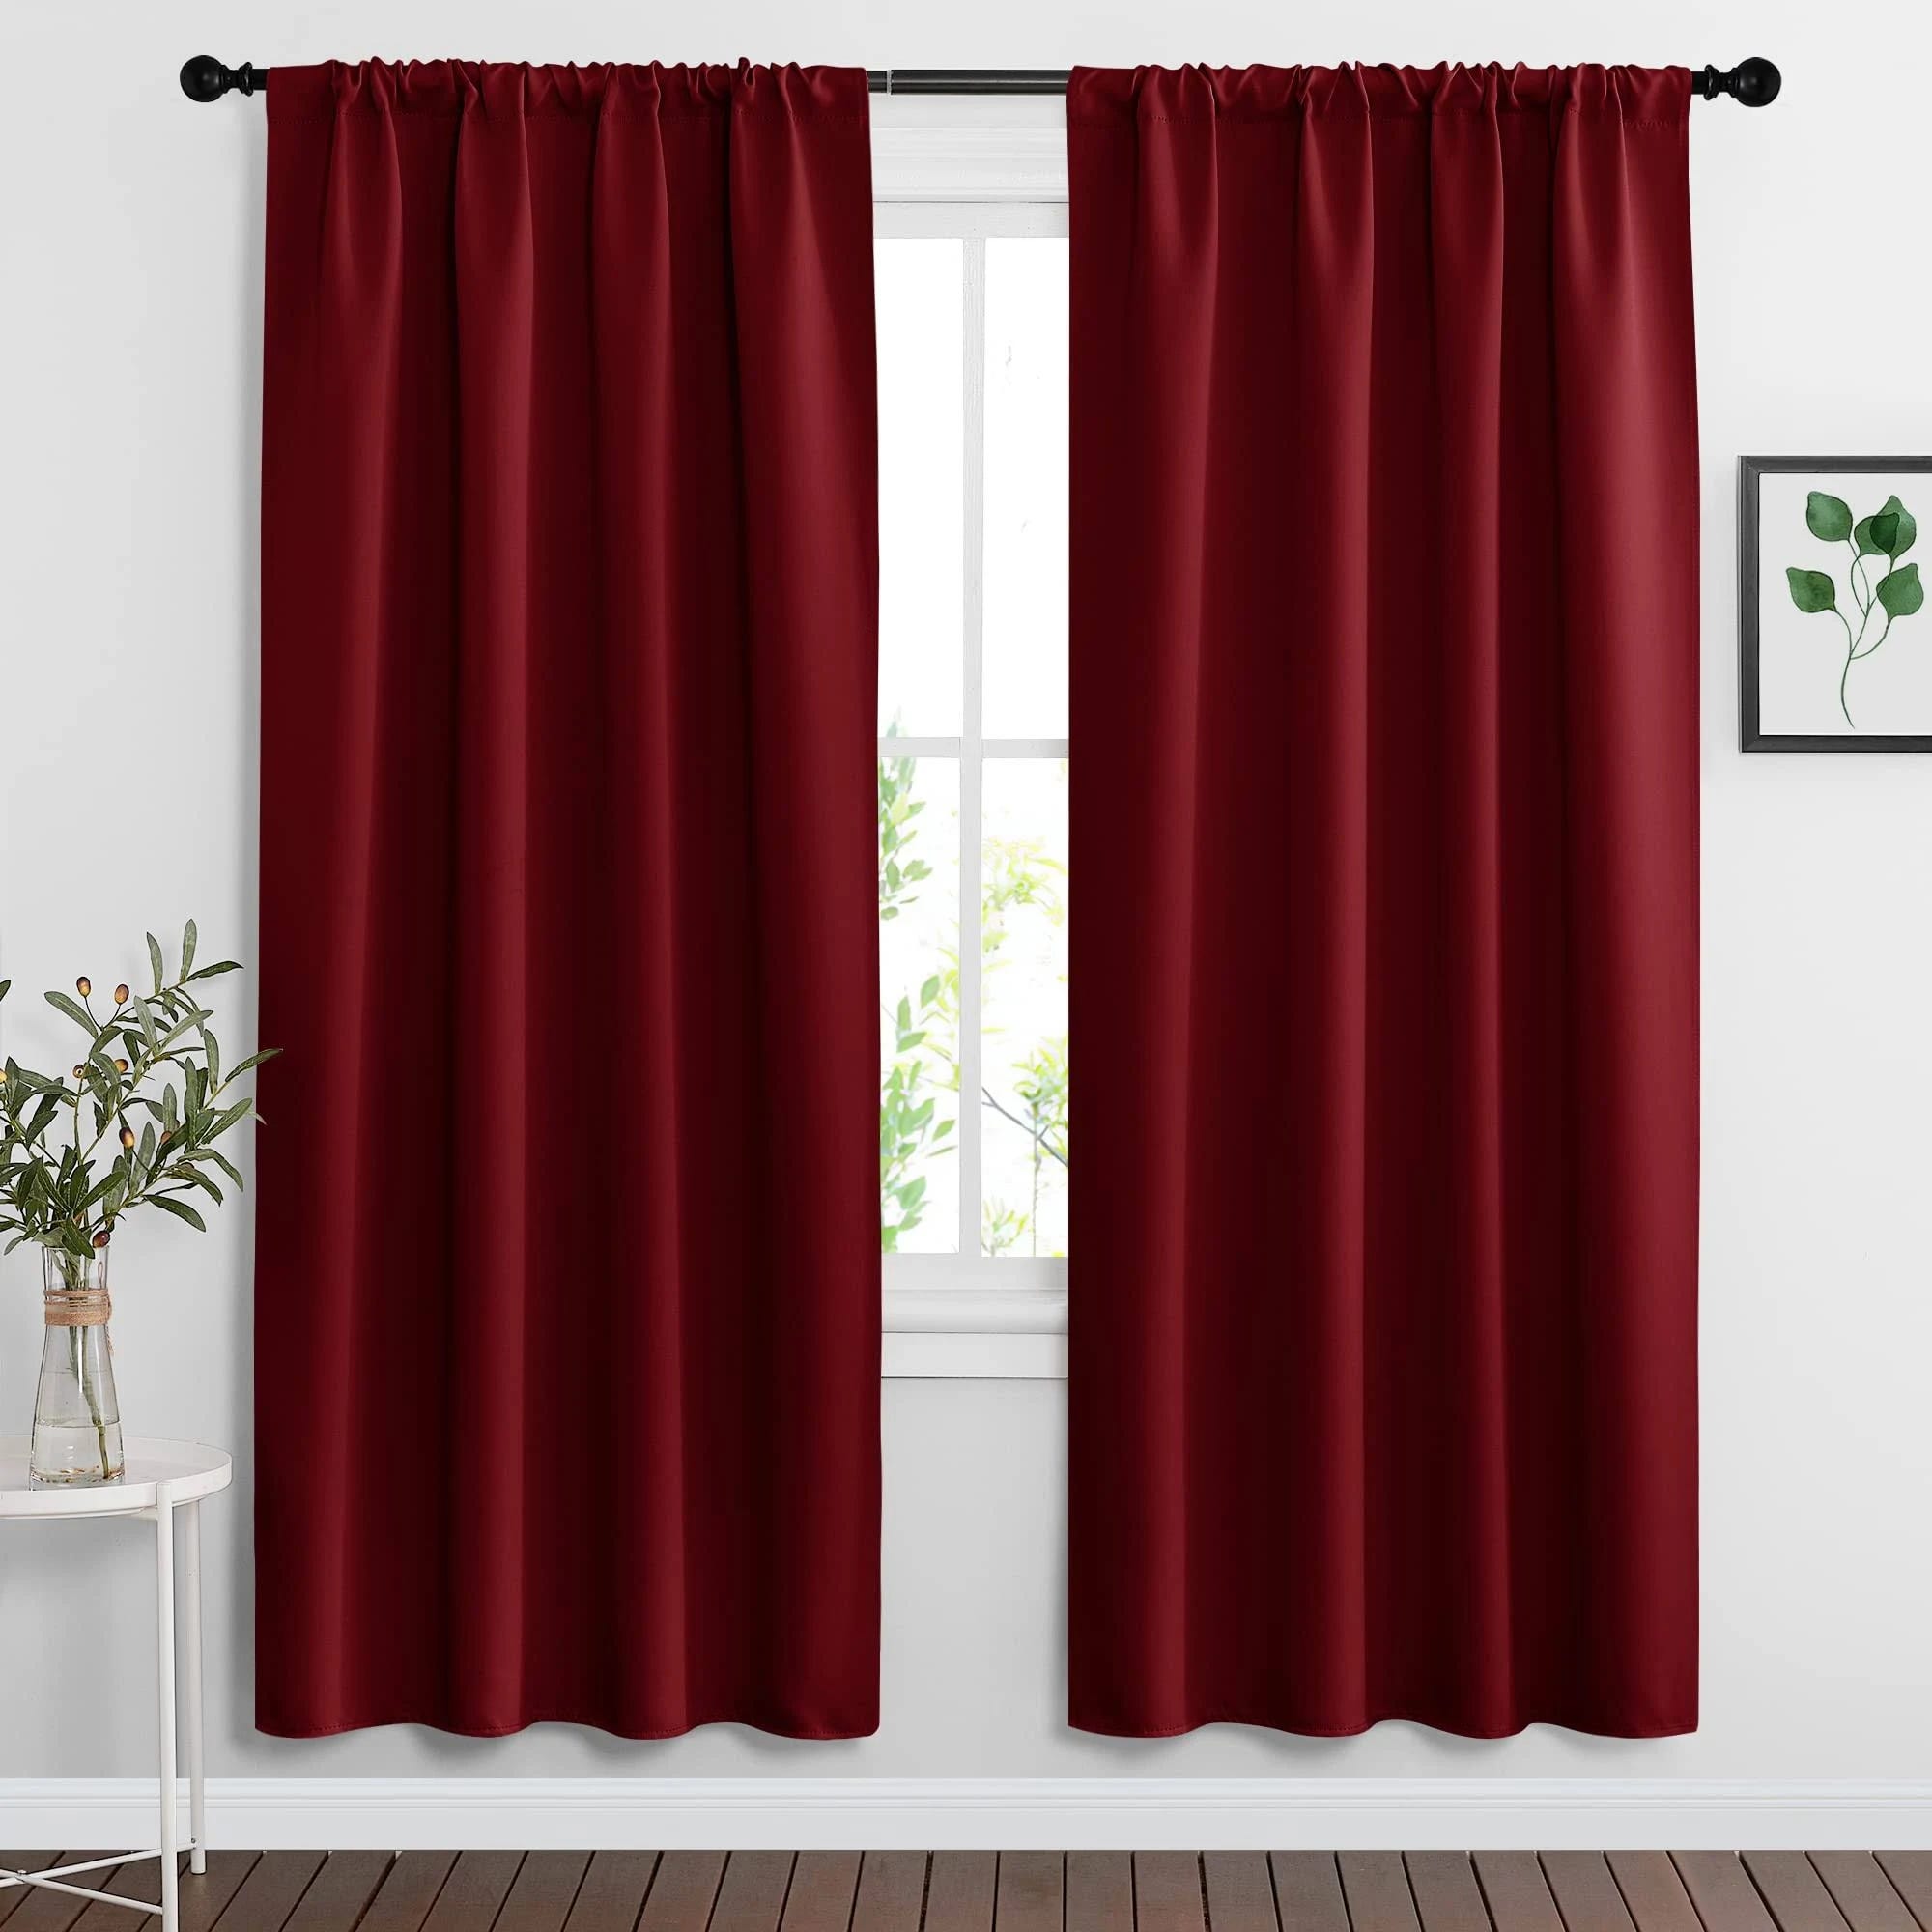 High-Quality Red Blackout Draperies for Enhancing Privacy and Room Temperature | Image